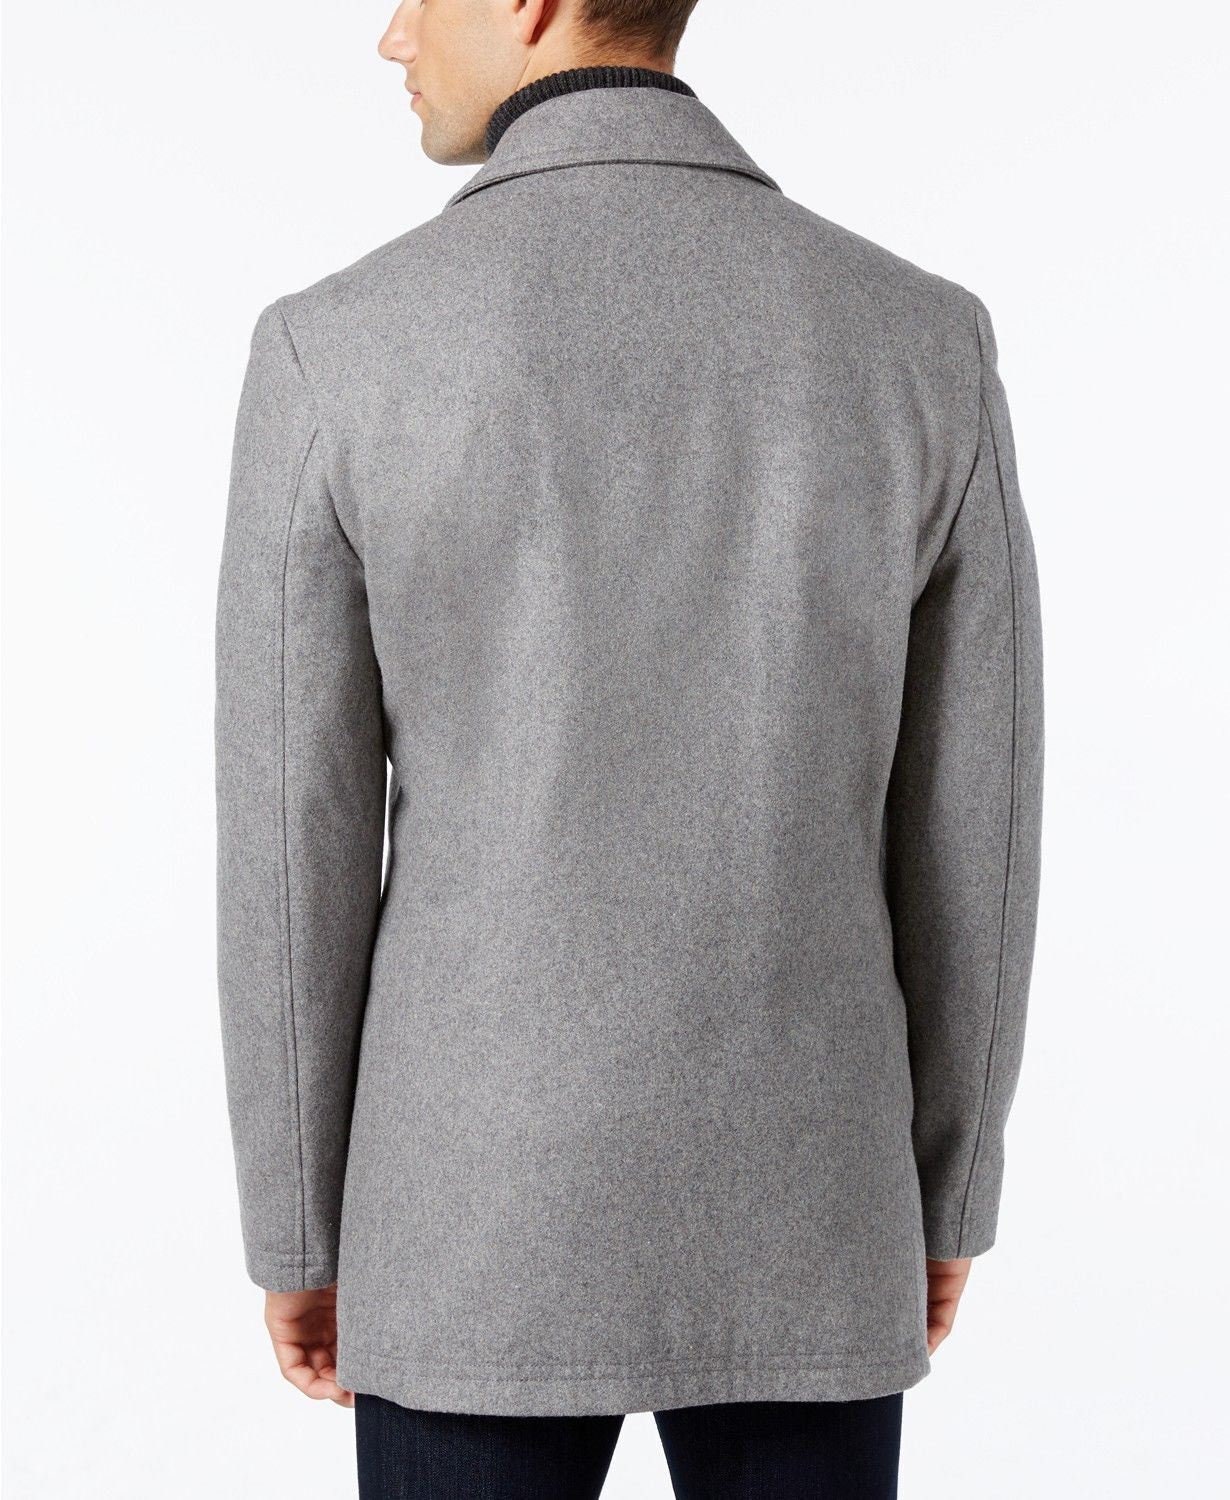 Men's Wool Double Breasted Pea Coat Jacket Military Grey - Etsy